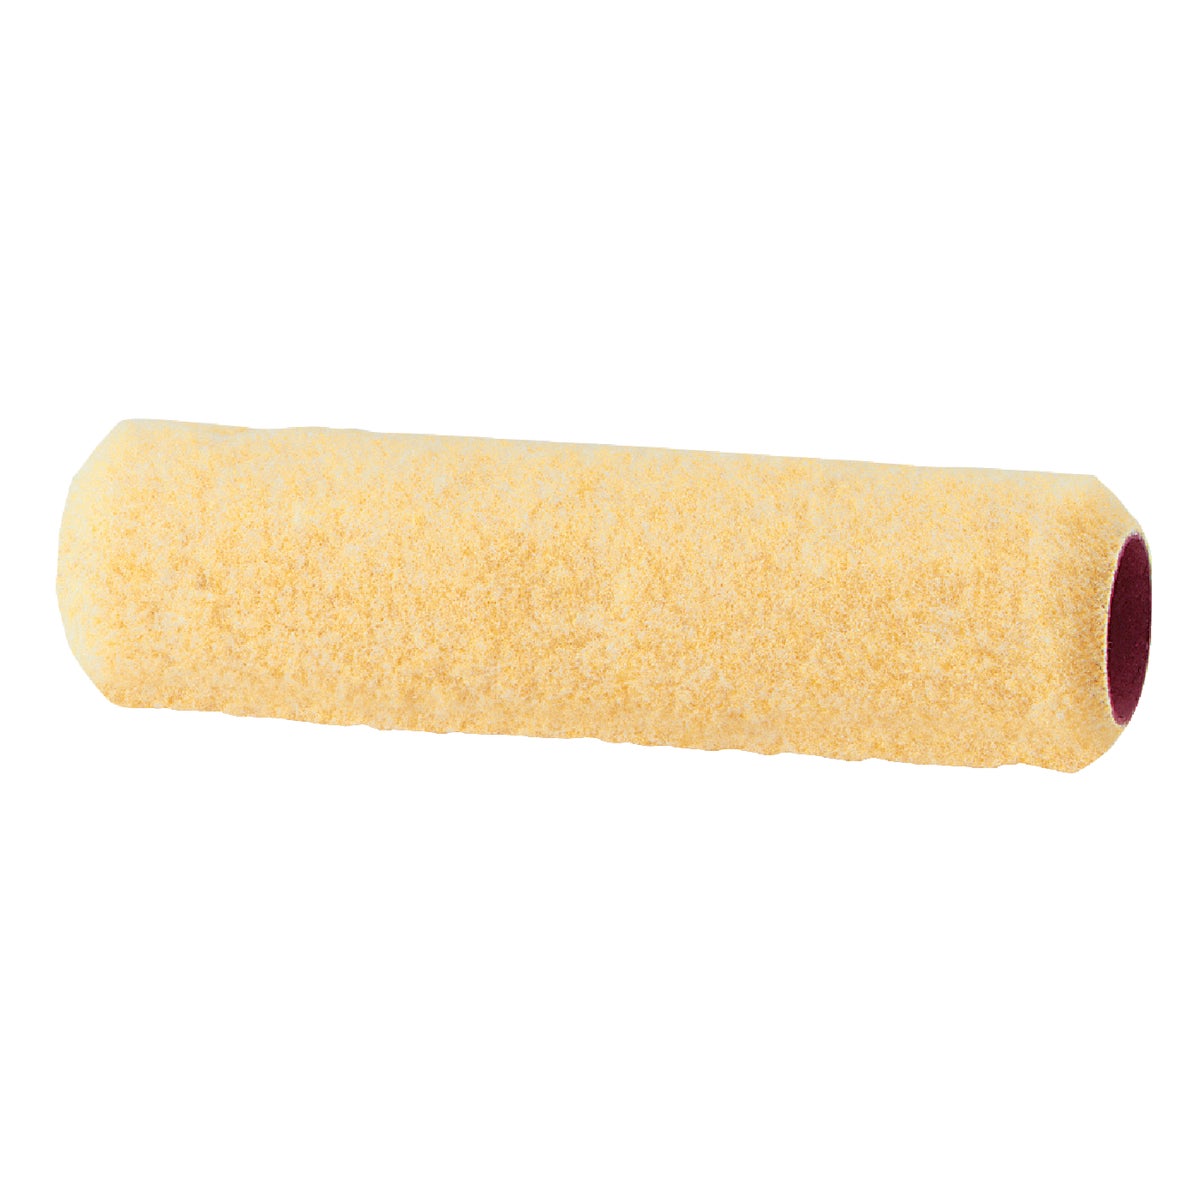 Wagner 9 In. x 3/8 In. Knit Fabric Roller Cover